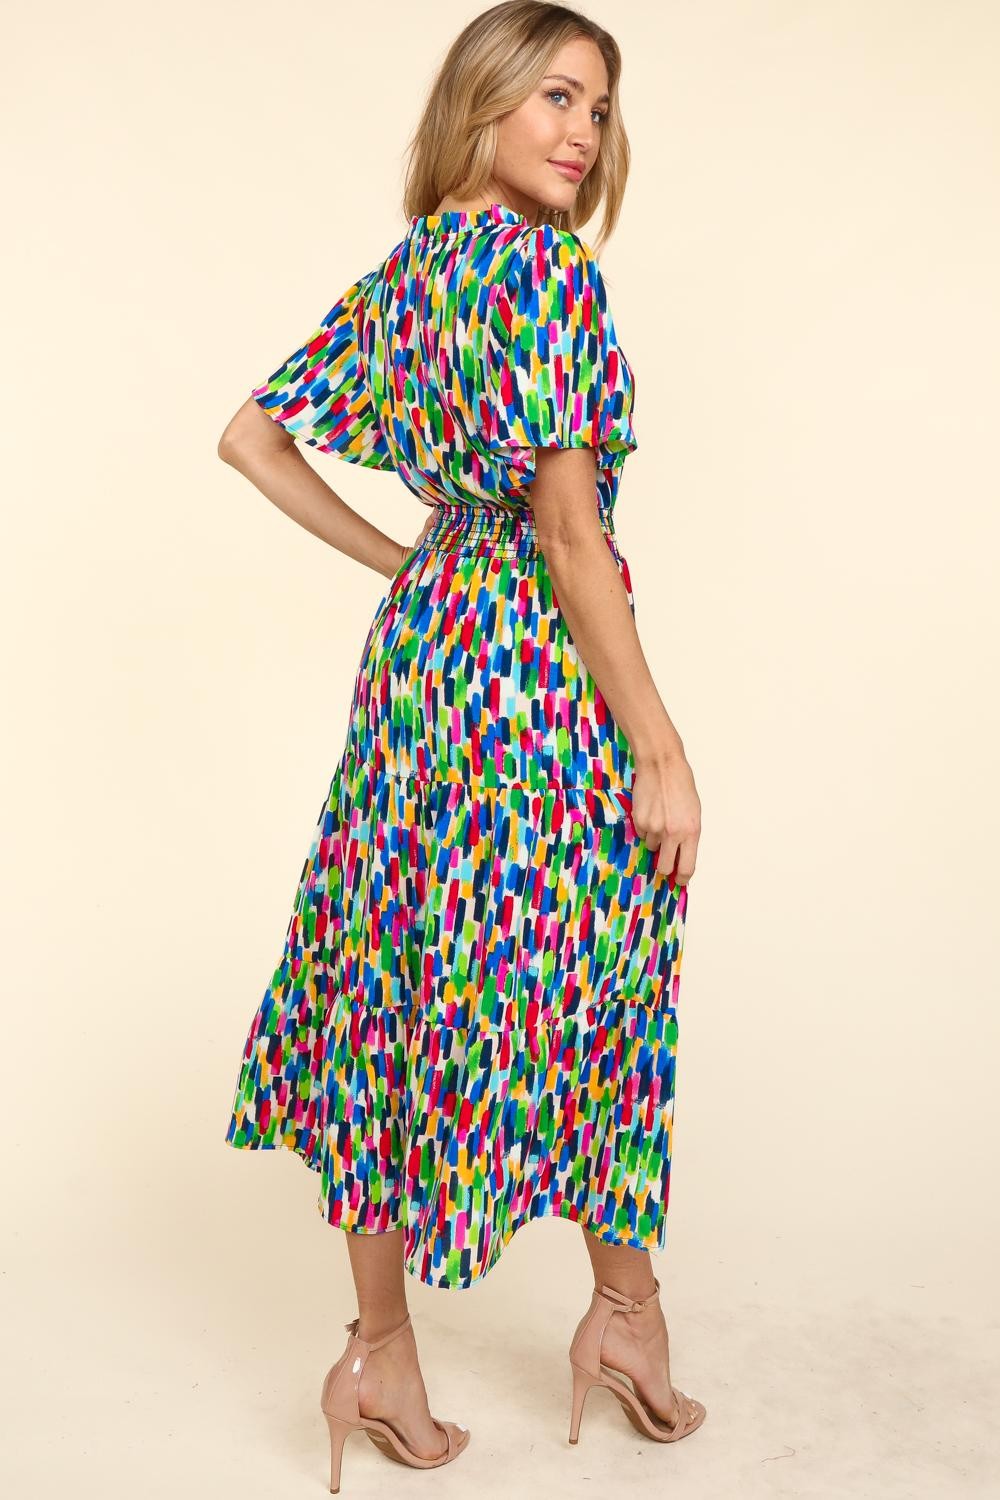 MULTI FIT AND FLARE MAXI FLORAL ABSTRACT DRESS W/ POCKETS